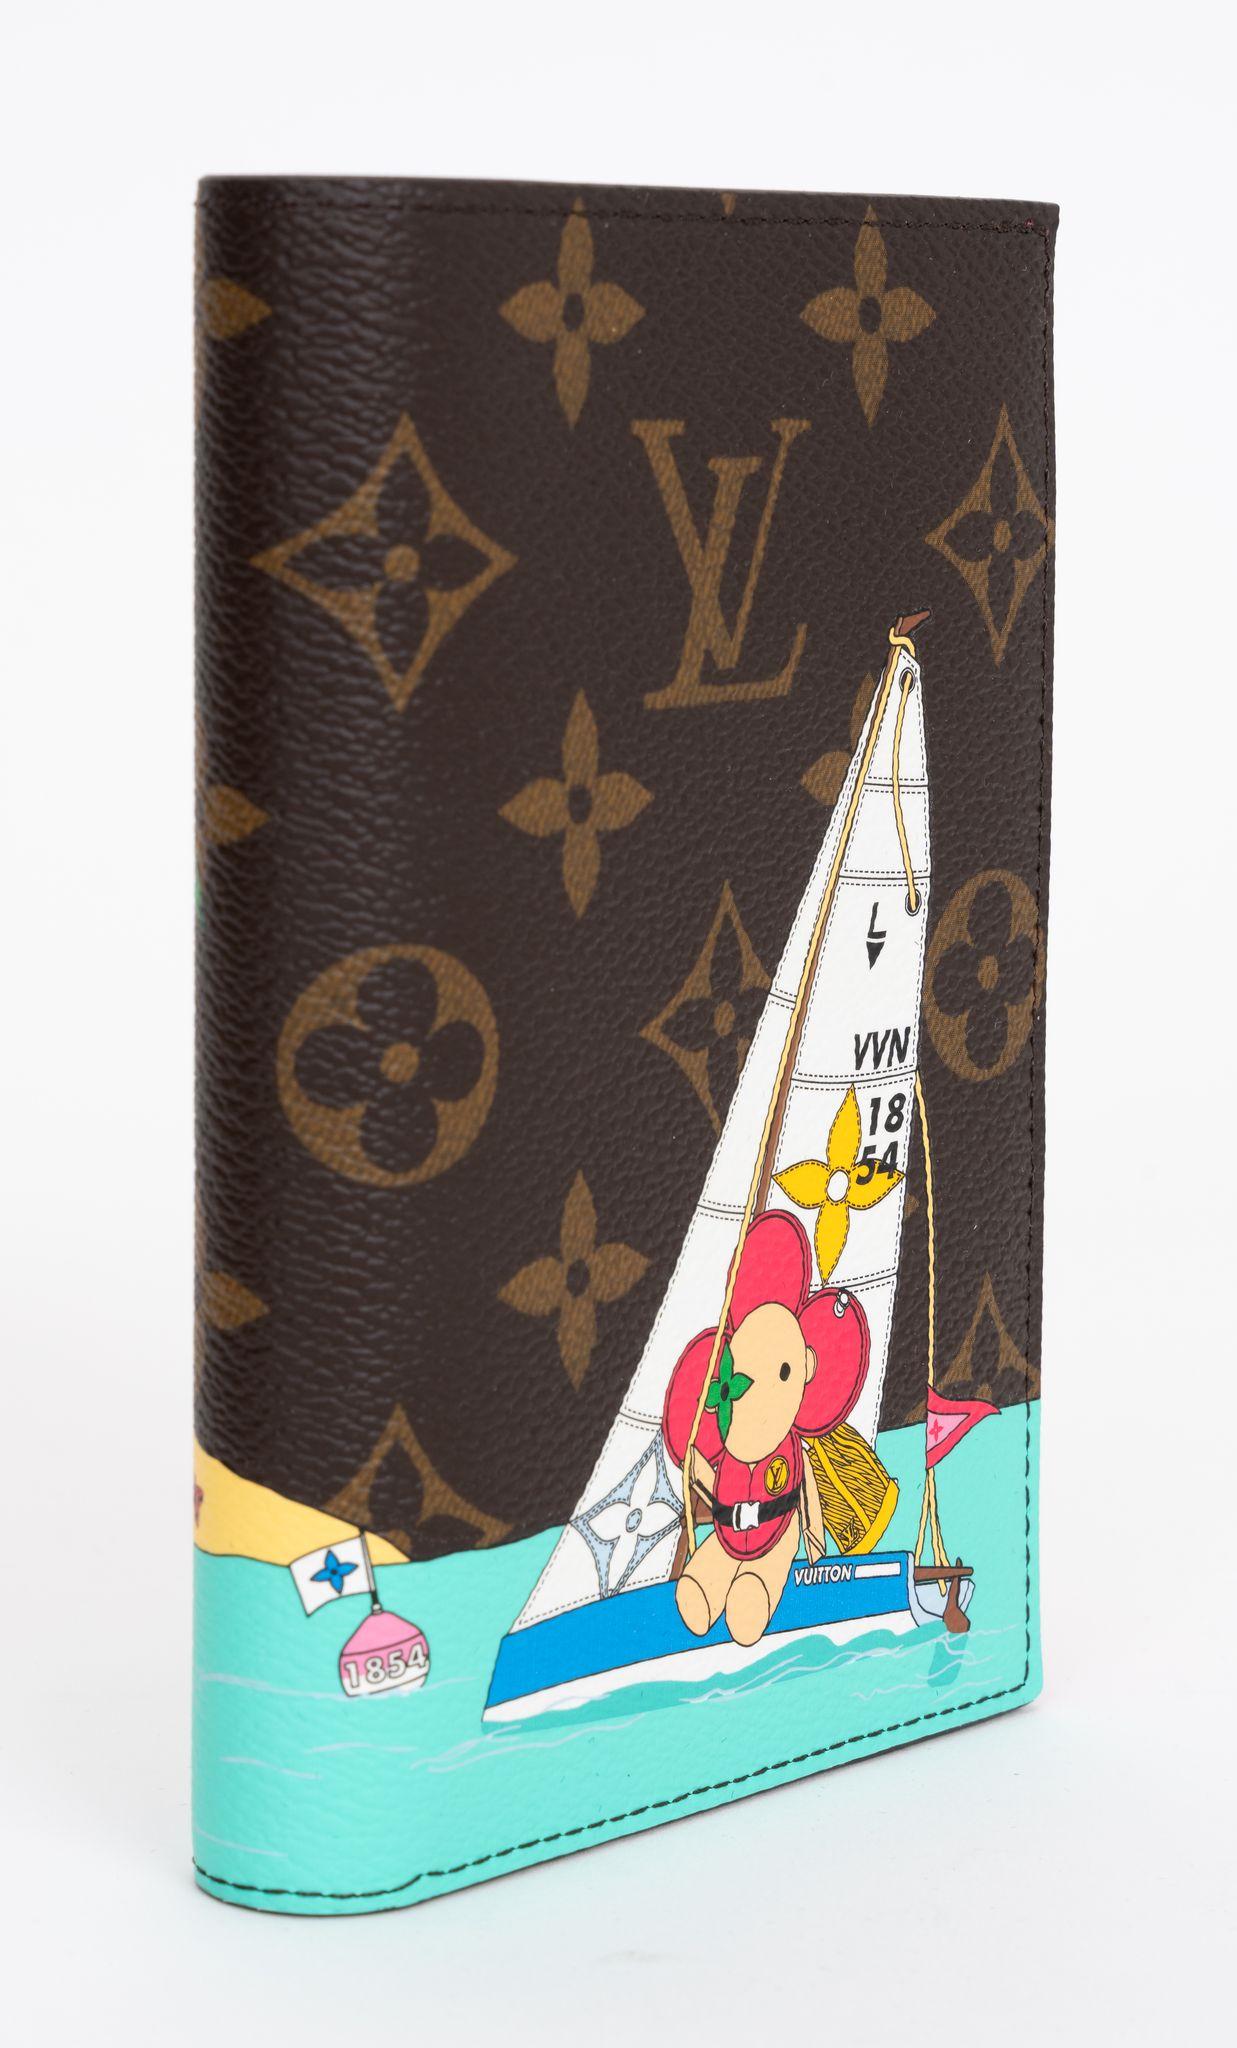 Louis Vuitton New Passport Cover Sailing in Monogram Canvas with cowhide leather lining. Features print of House mascot Vivienne sailing on the tropical seas. Contains four card slots, one flat pocket, and two open pockets. Part of the limited